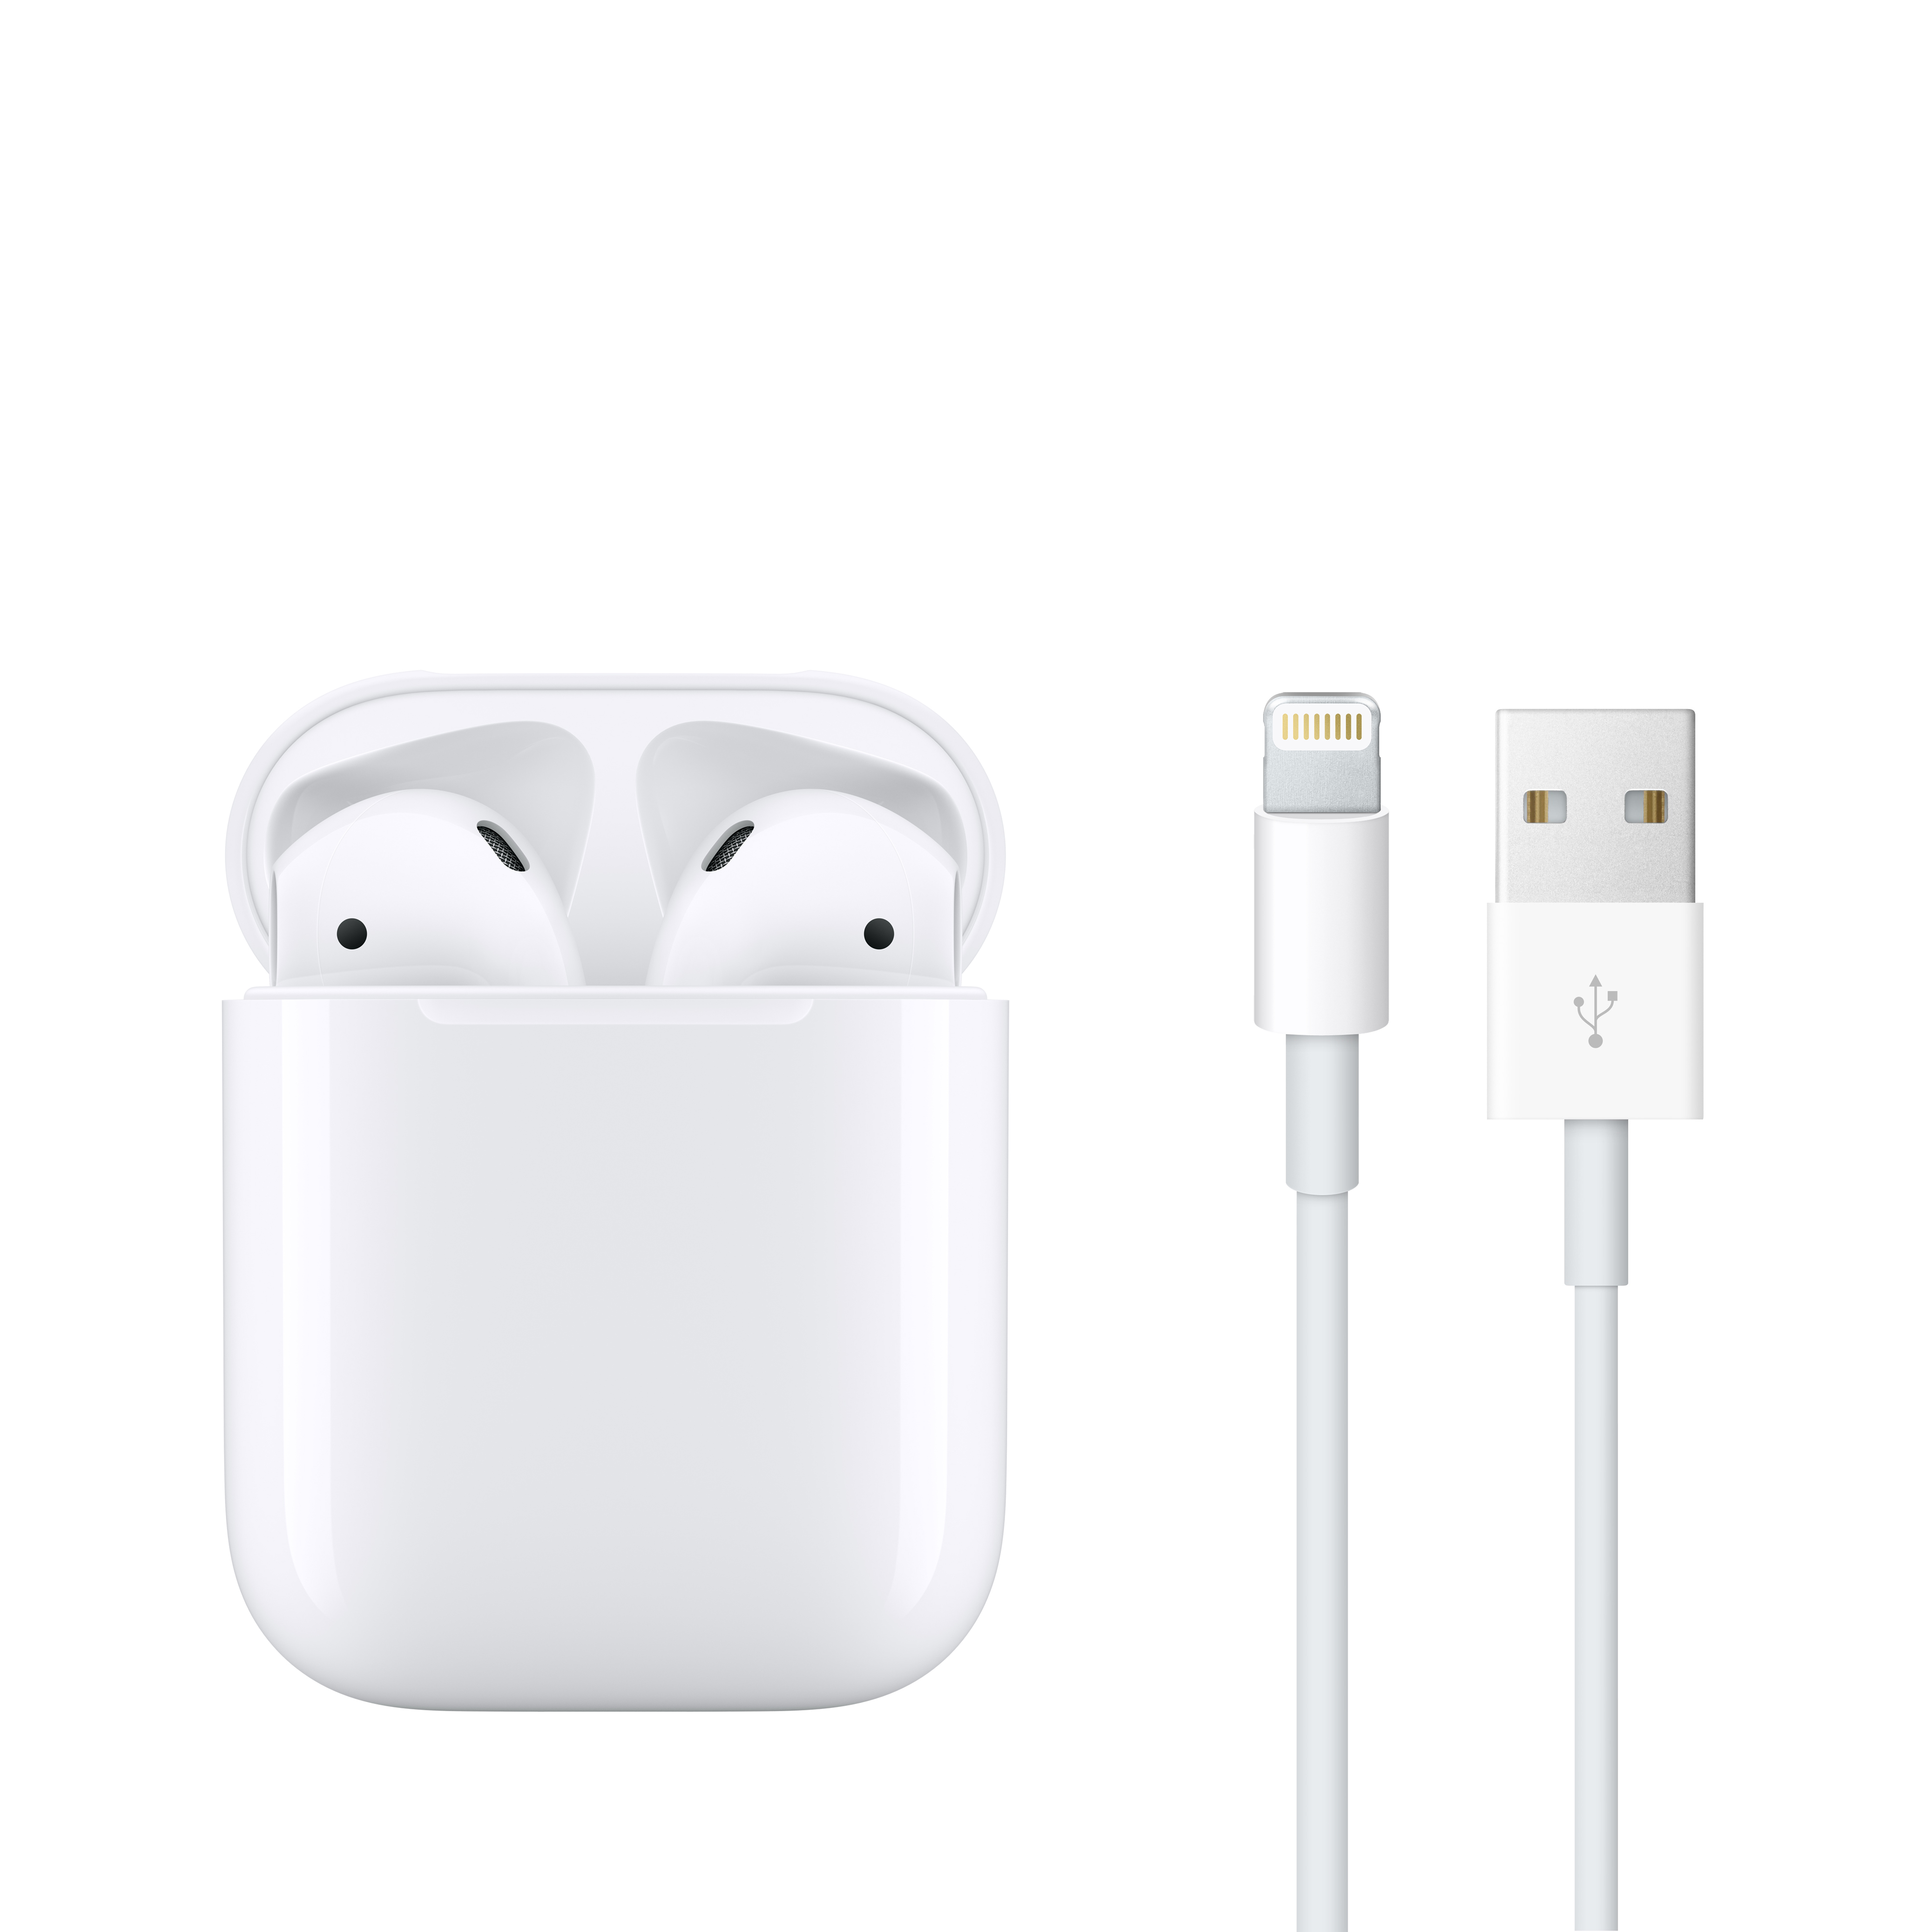 Apple AirPods with Charging Case (2nd Generation) - image 5 of 5